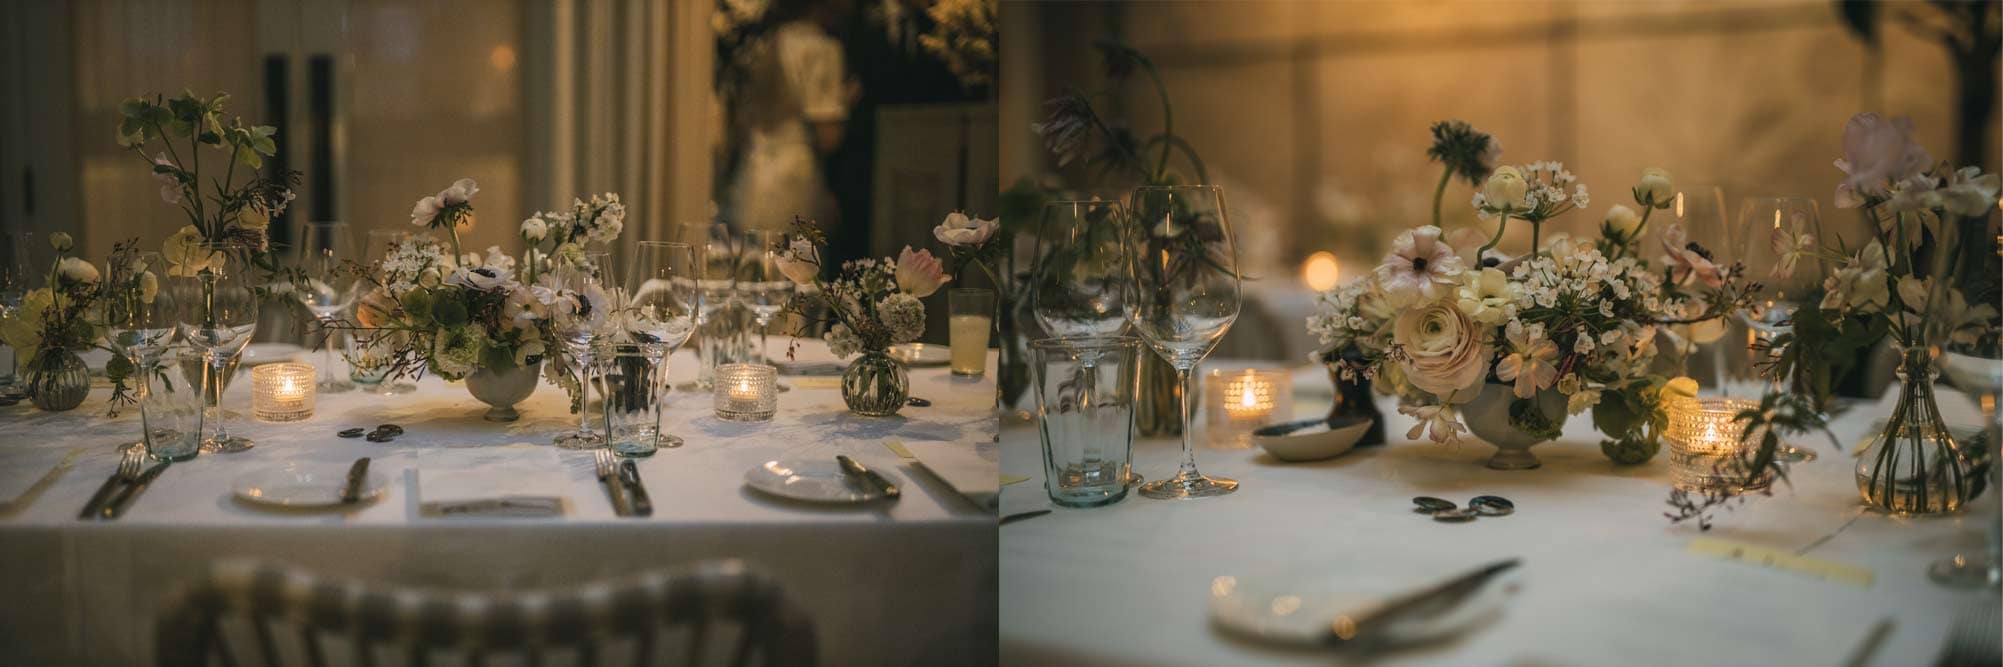 wedding events at spring restaurant in somerset house